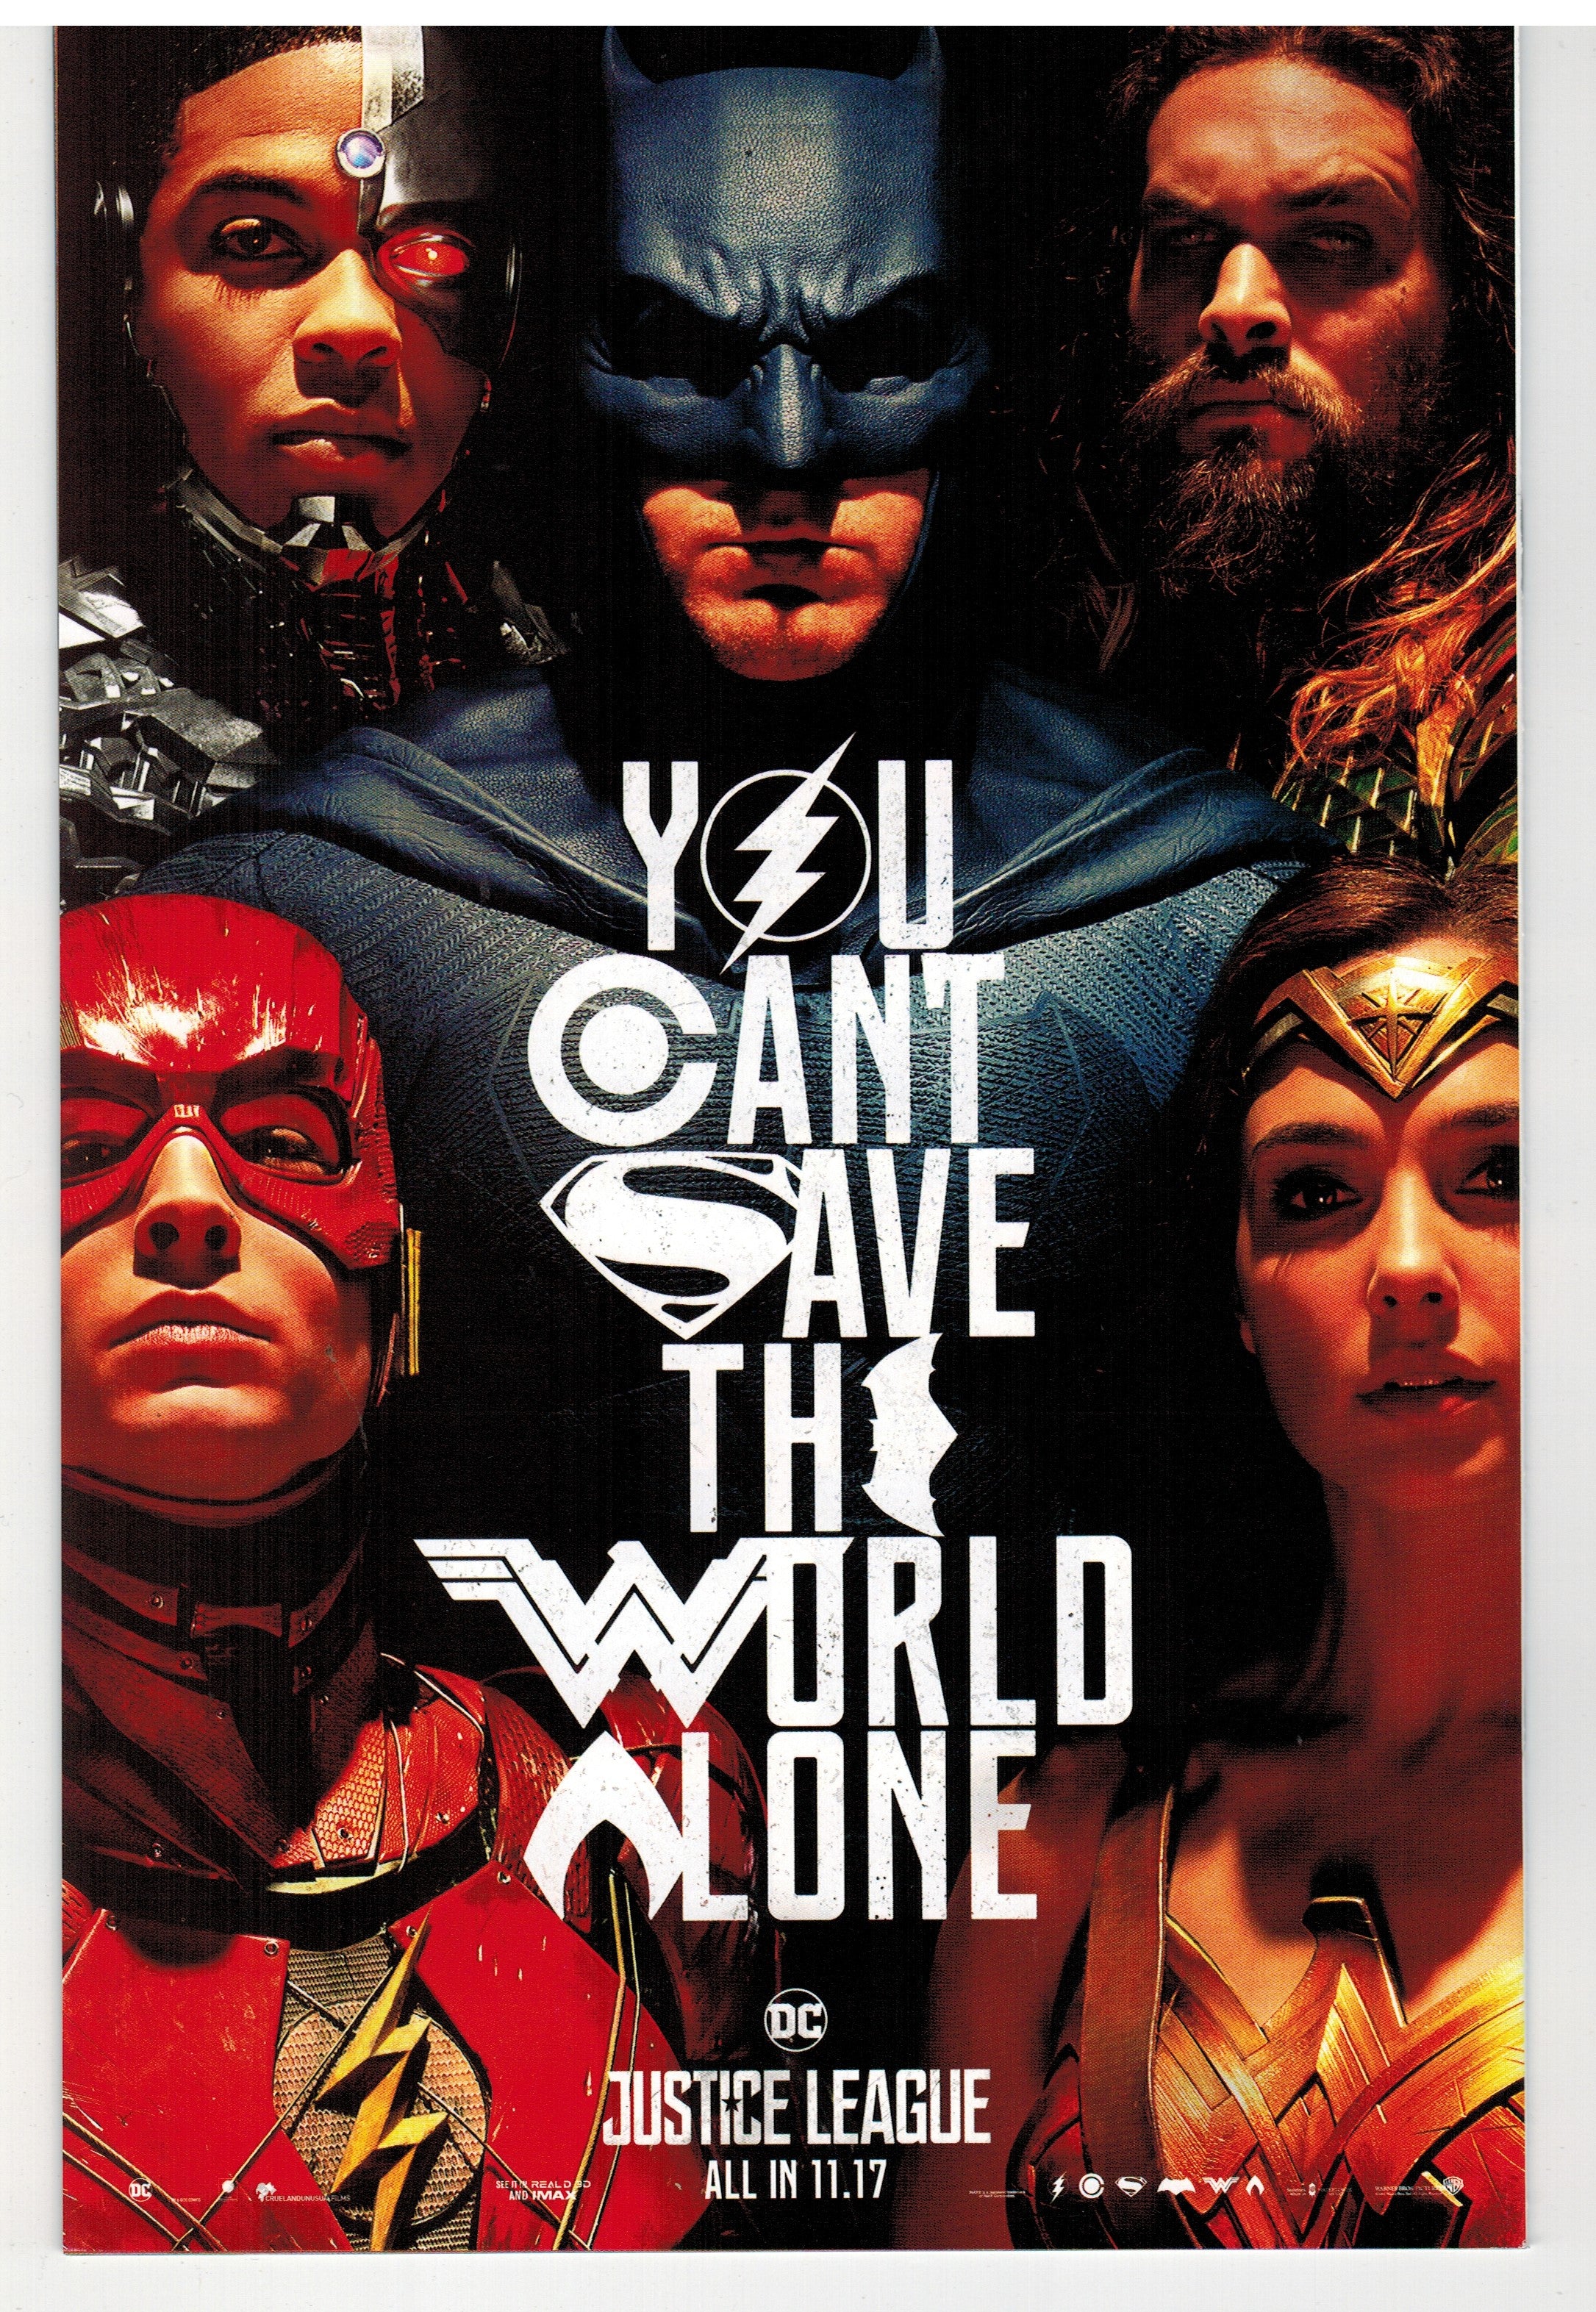 Photo of Justice League Day: Special Edition (2017) Issue 1A - Near Mint Comic sold by Stronghold Collectibles